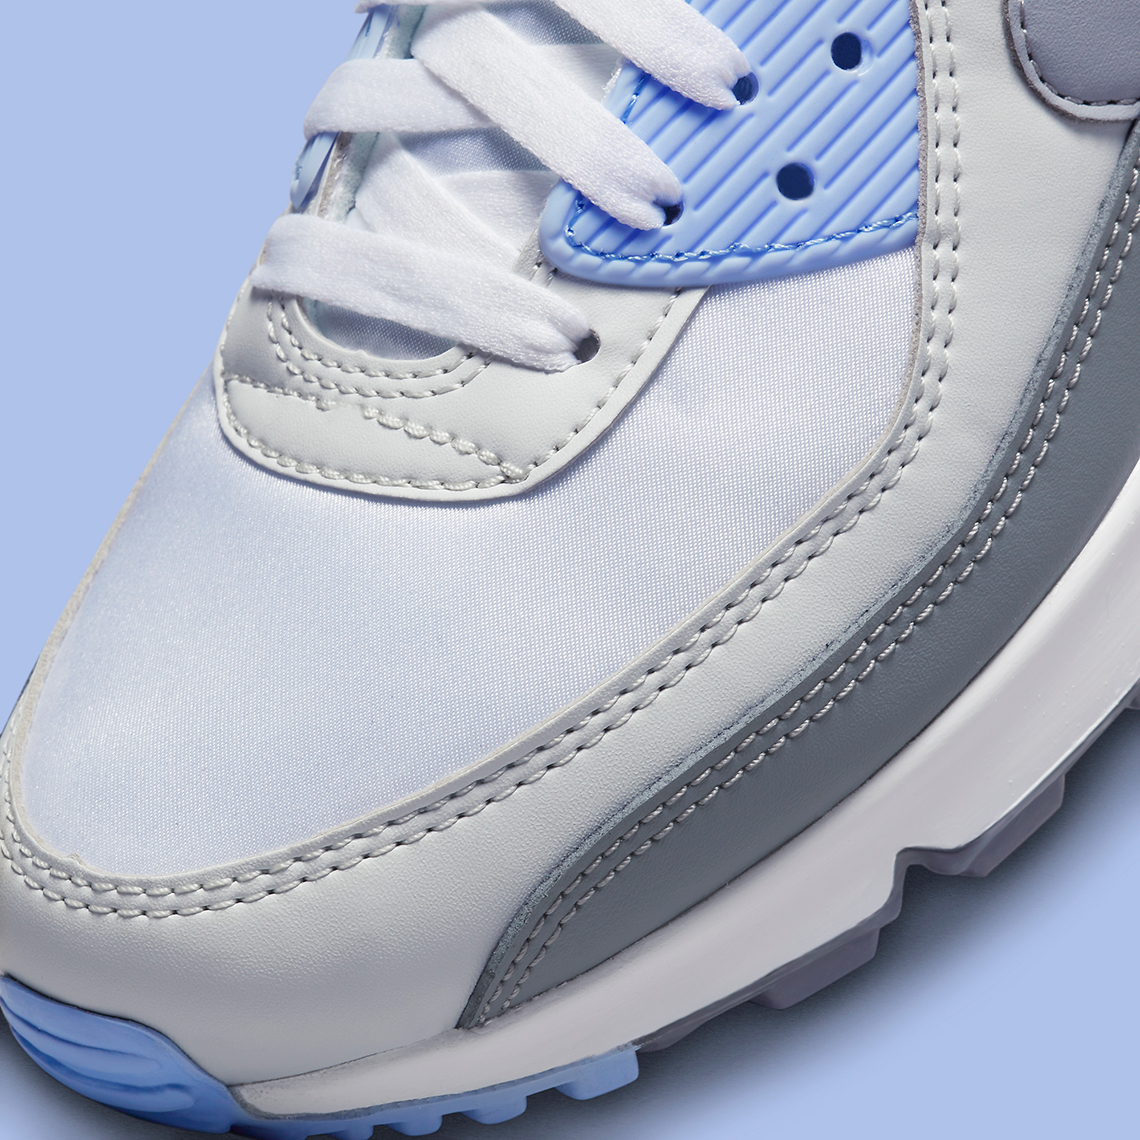 The Nike Air Max 90 Welcomes A “Blissful Blue” Accent | LaptrinhX / News